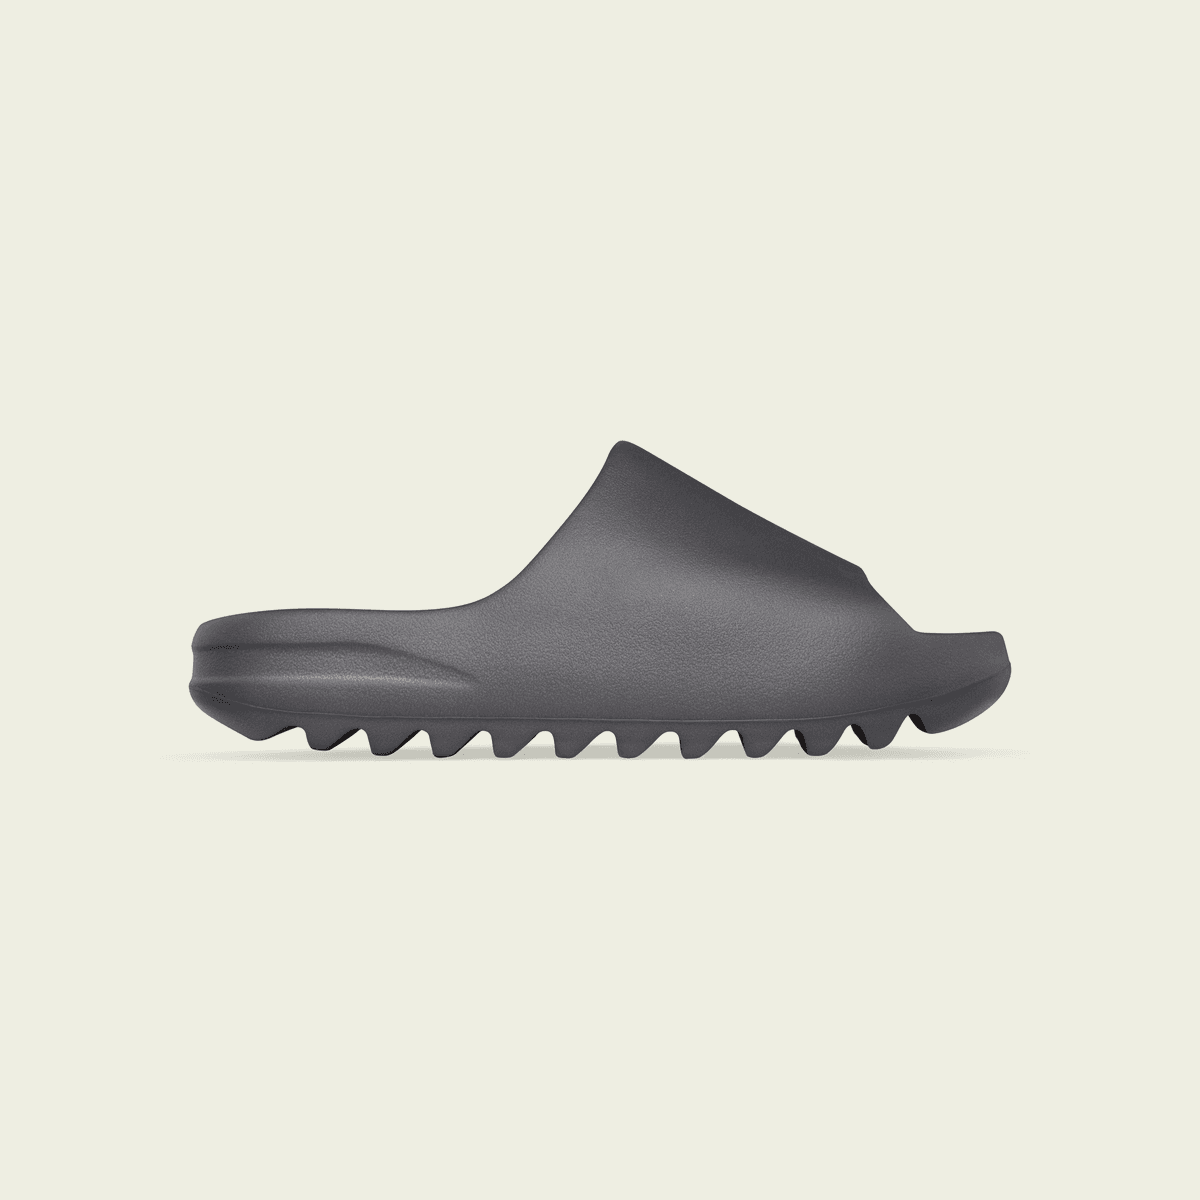 Official Images Of The Yeezy Slide "Granite"